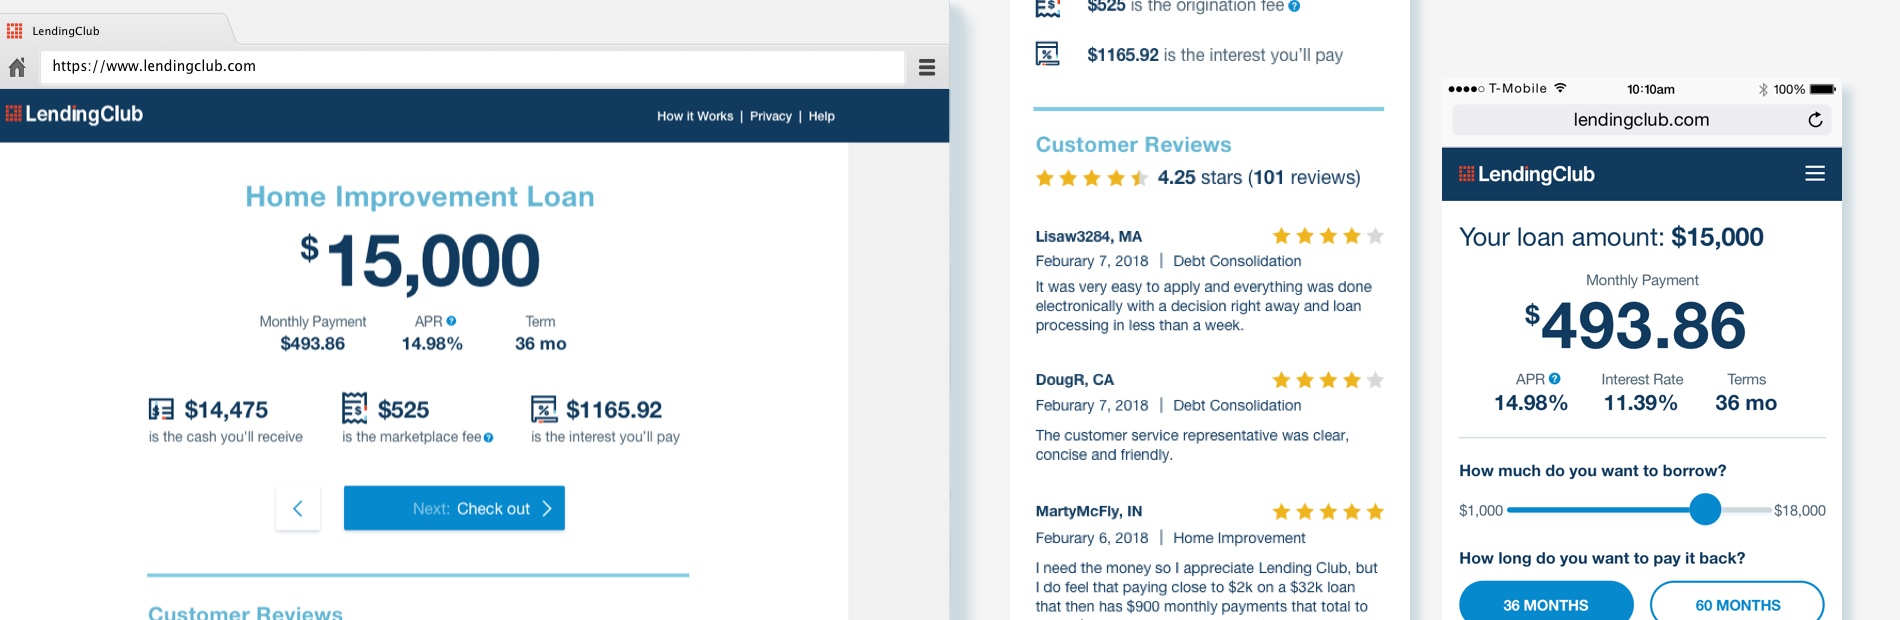 LendingClub Offer Page Redesign - Liz Chang